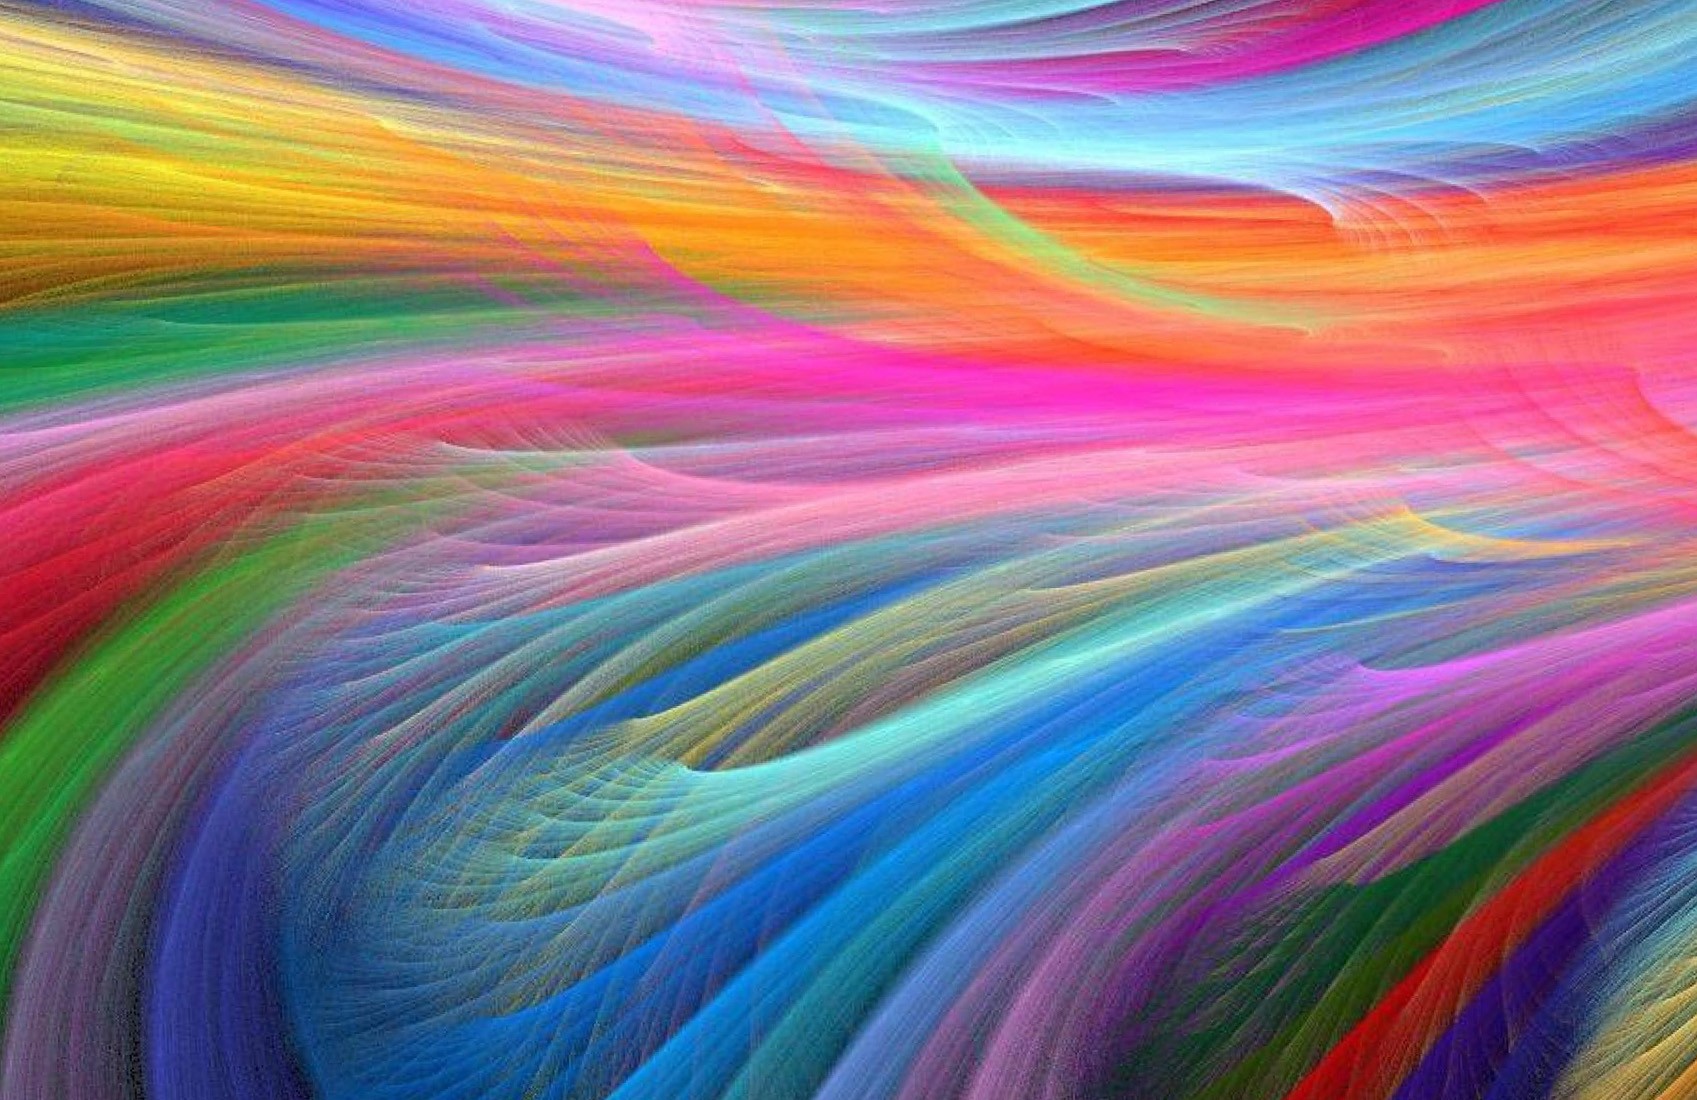 Abstract Wallpaper, Hd Artworks, Cool Desktop Images, - Pattern Colorful Background Hd - HD Wallpaper 